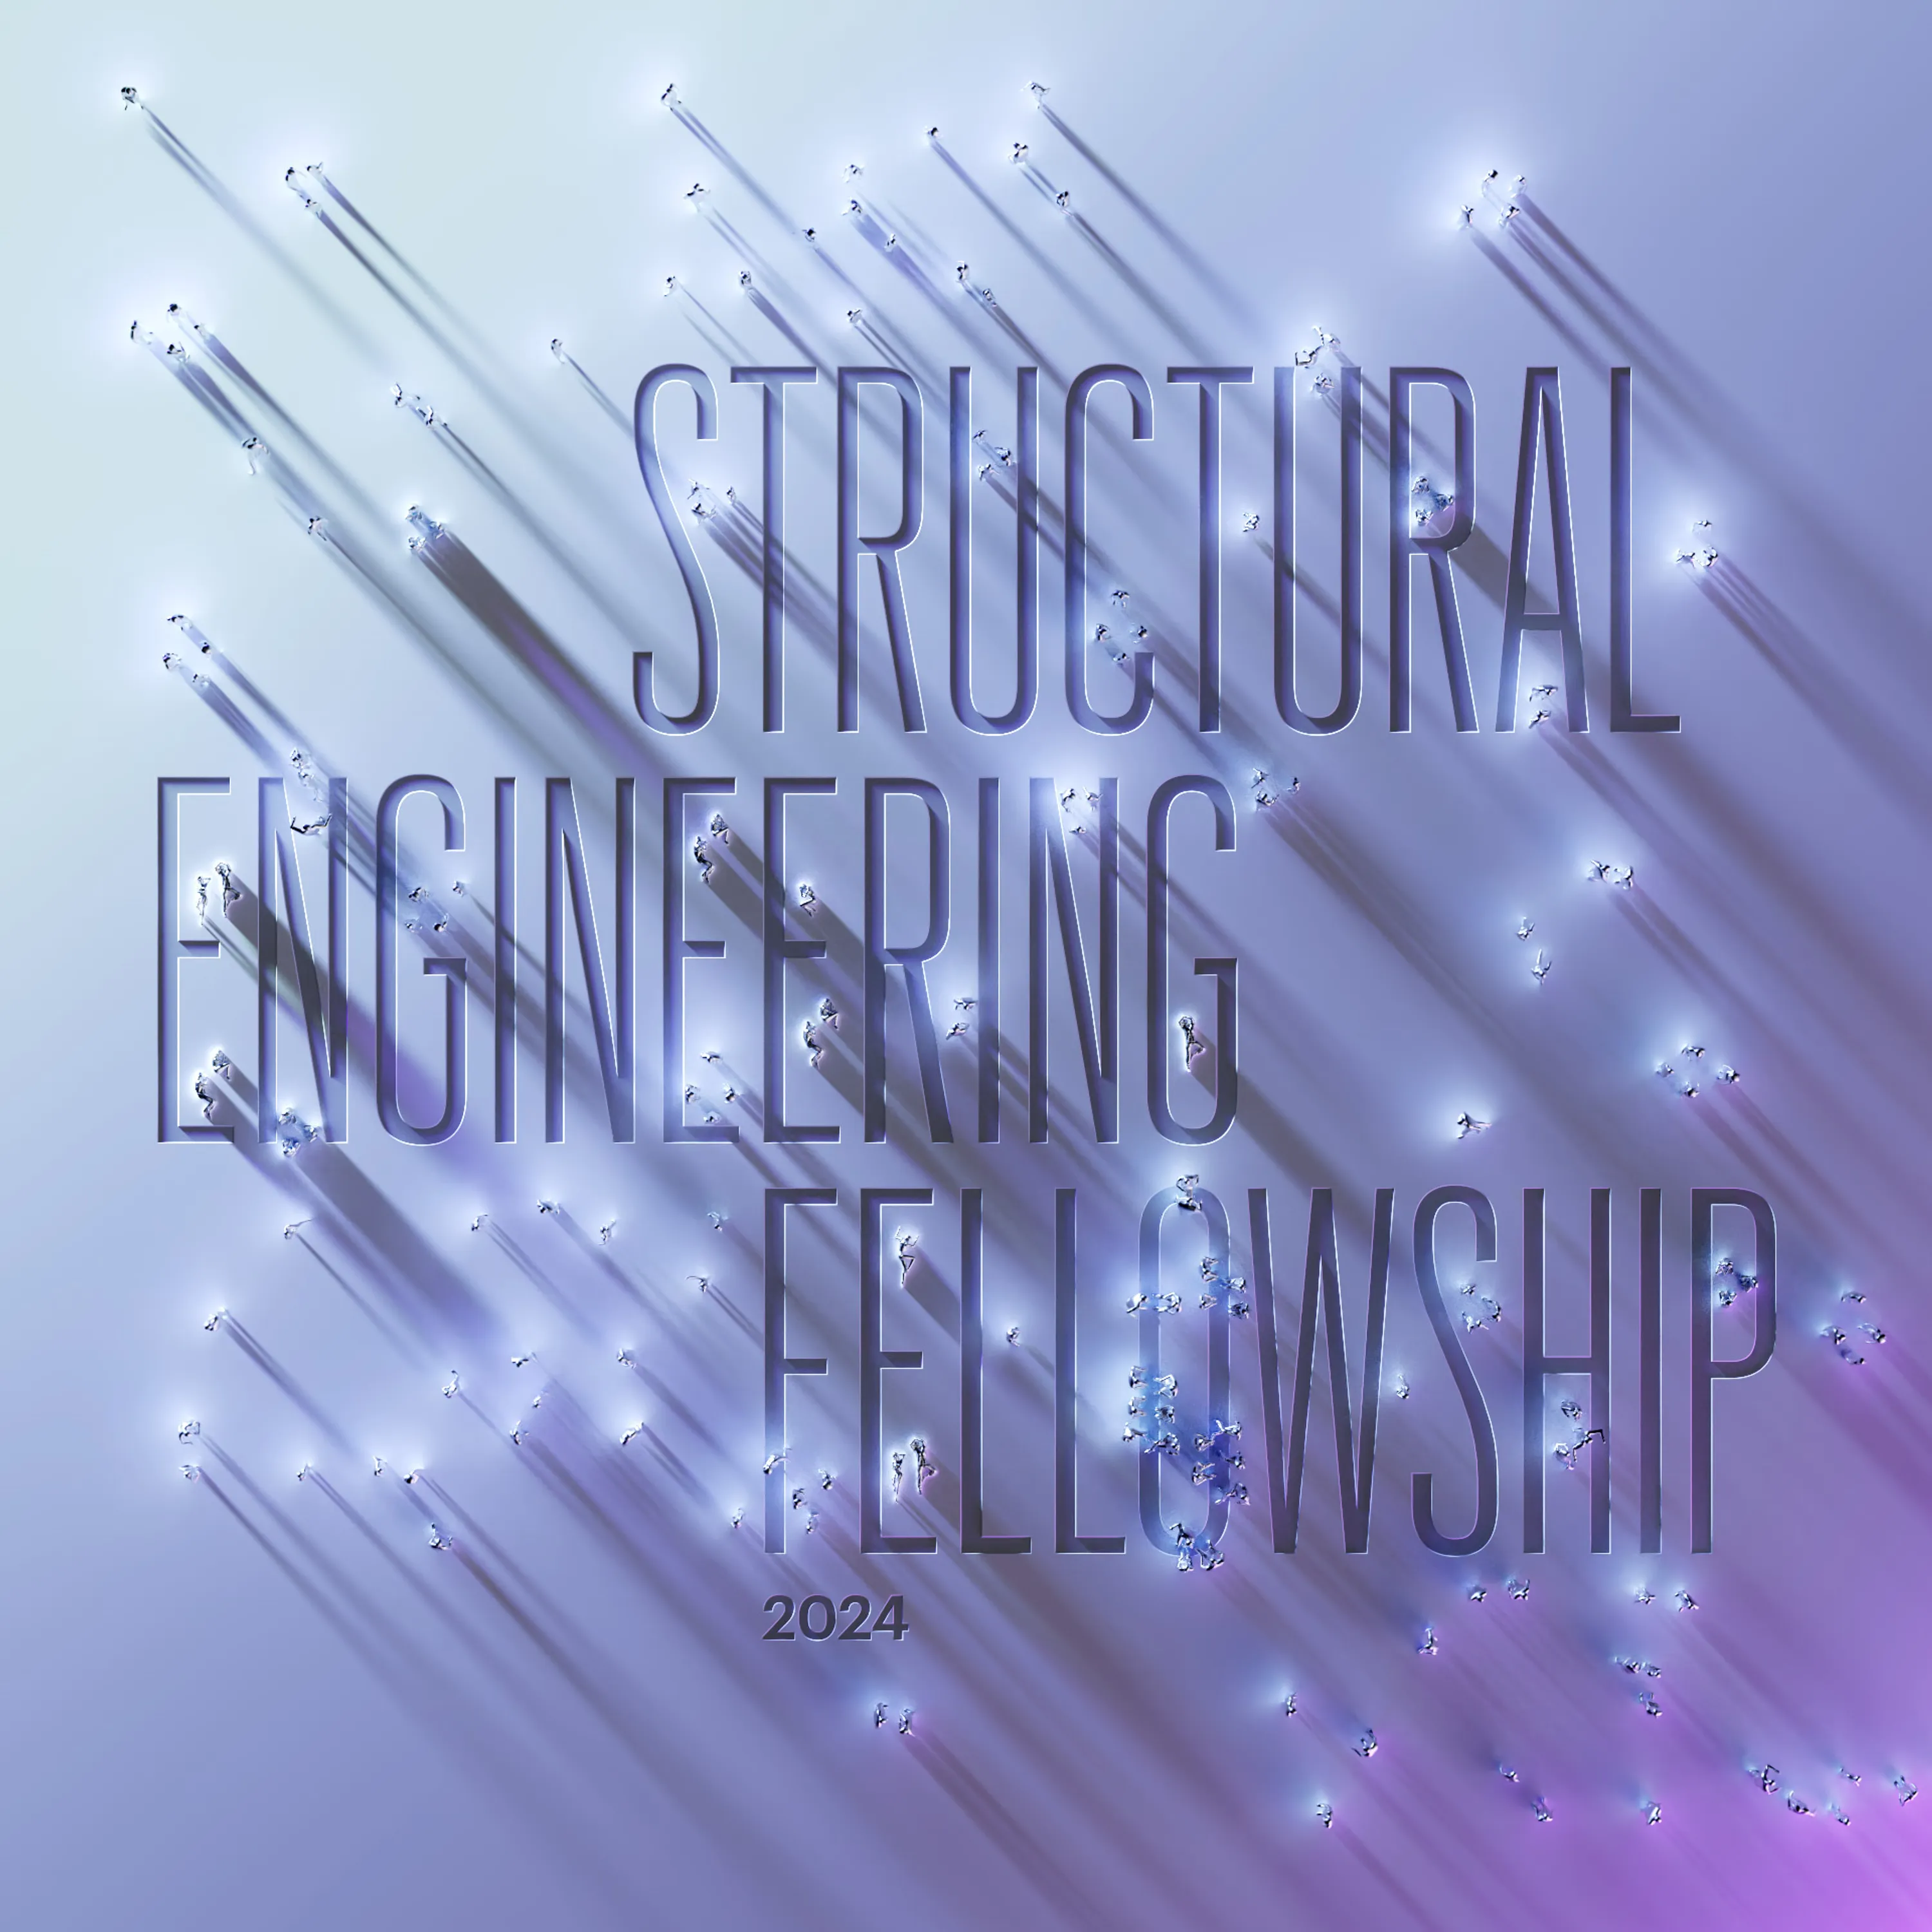 SOMF Structural Engineering Fellowship Sqaure